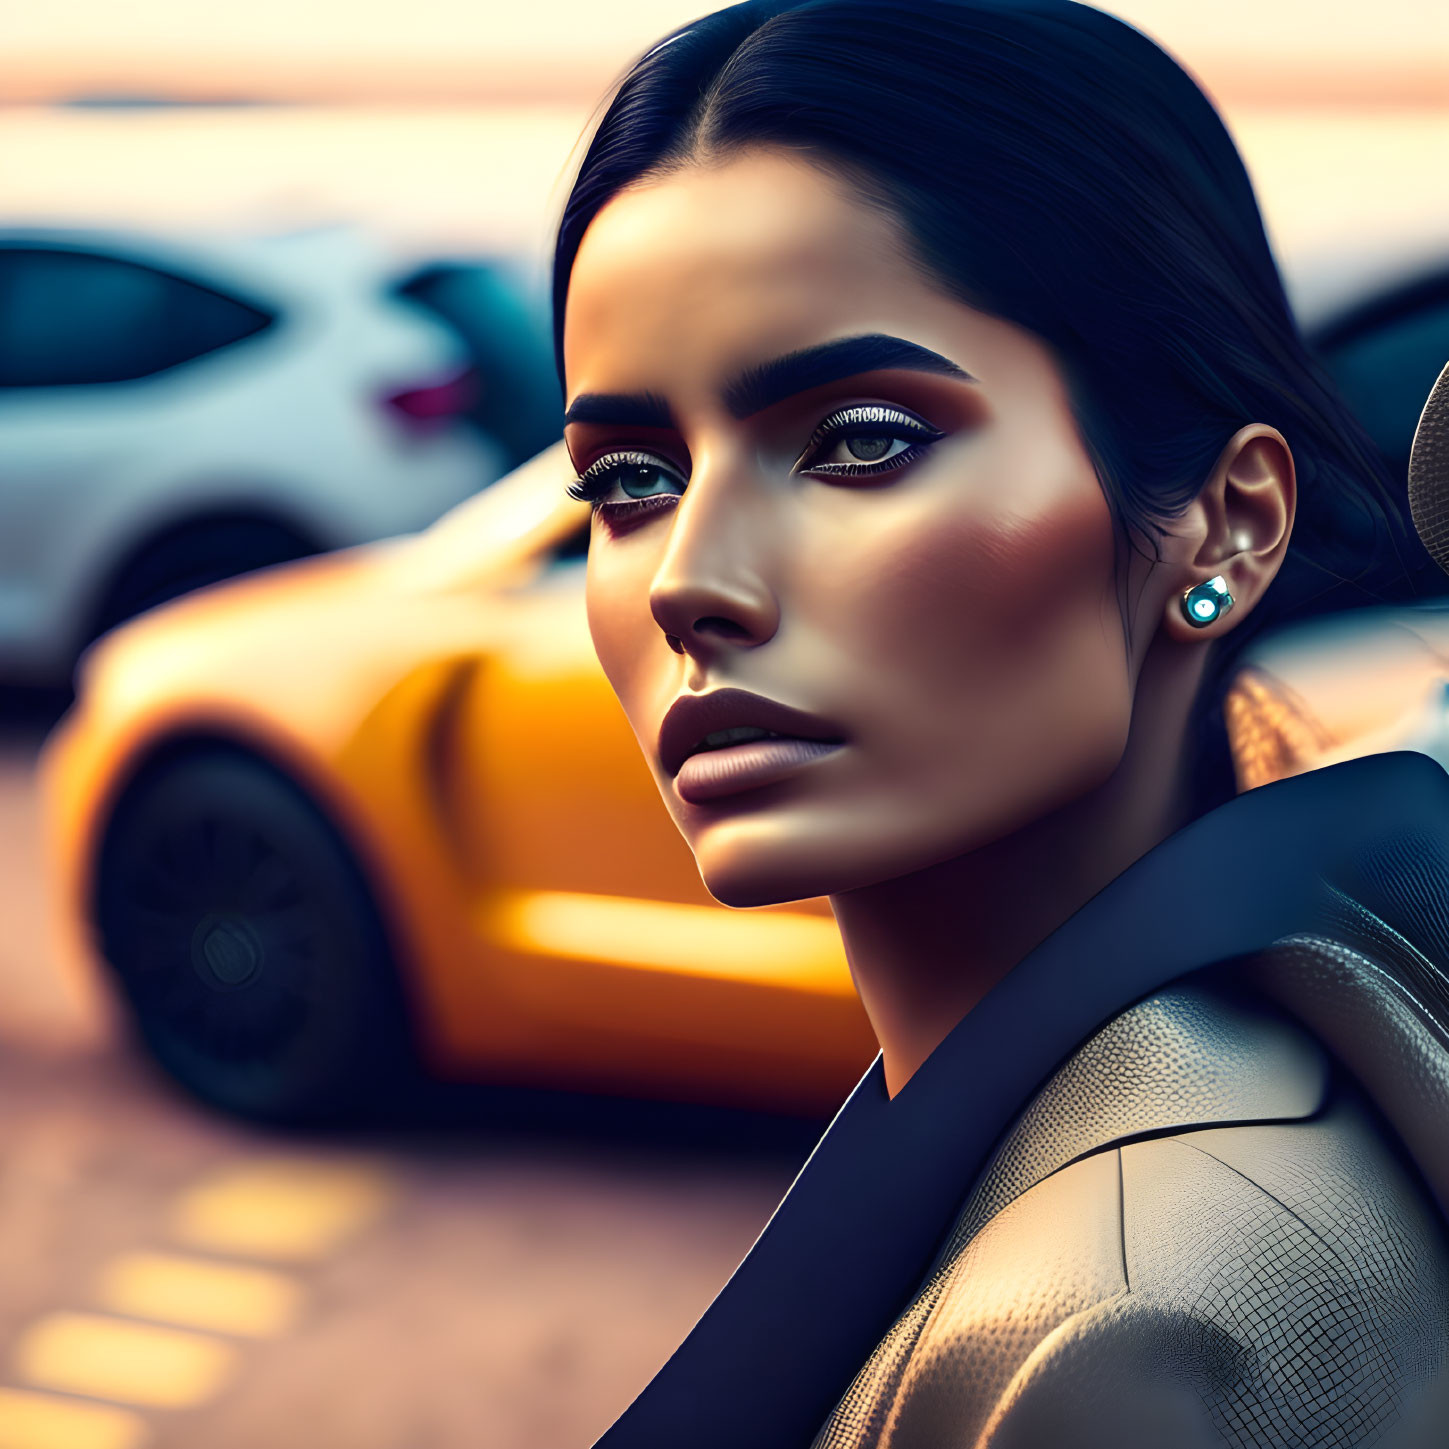 Digital Artwork: Woman with Striking Makeup and Sports Car in Background